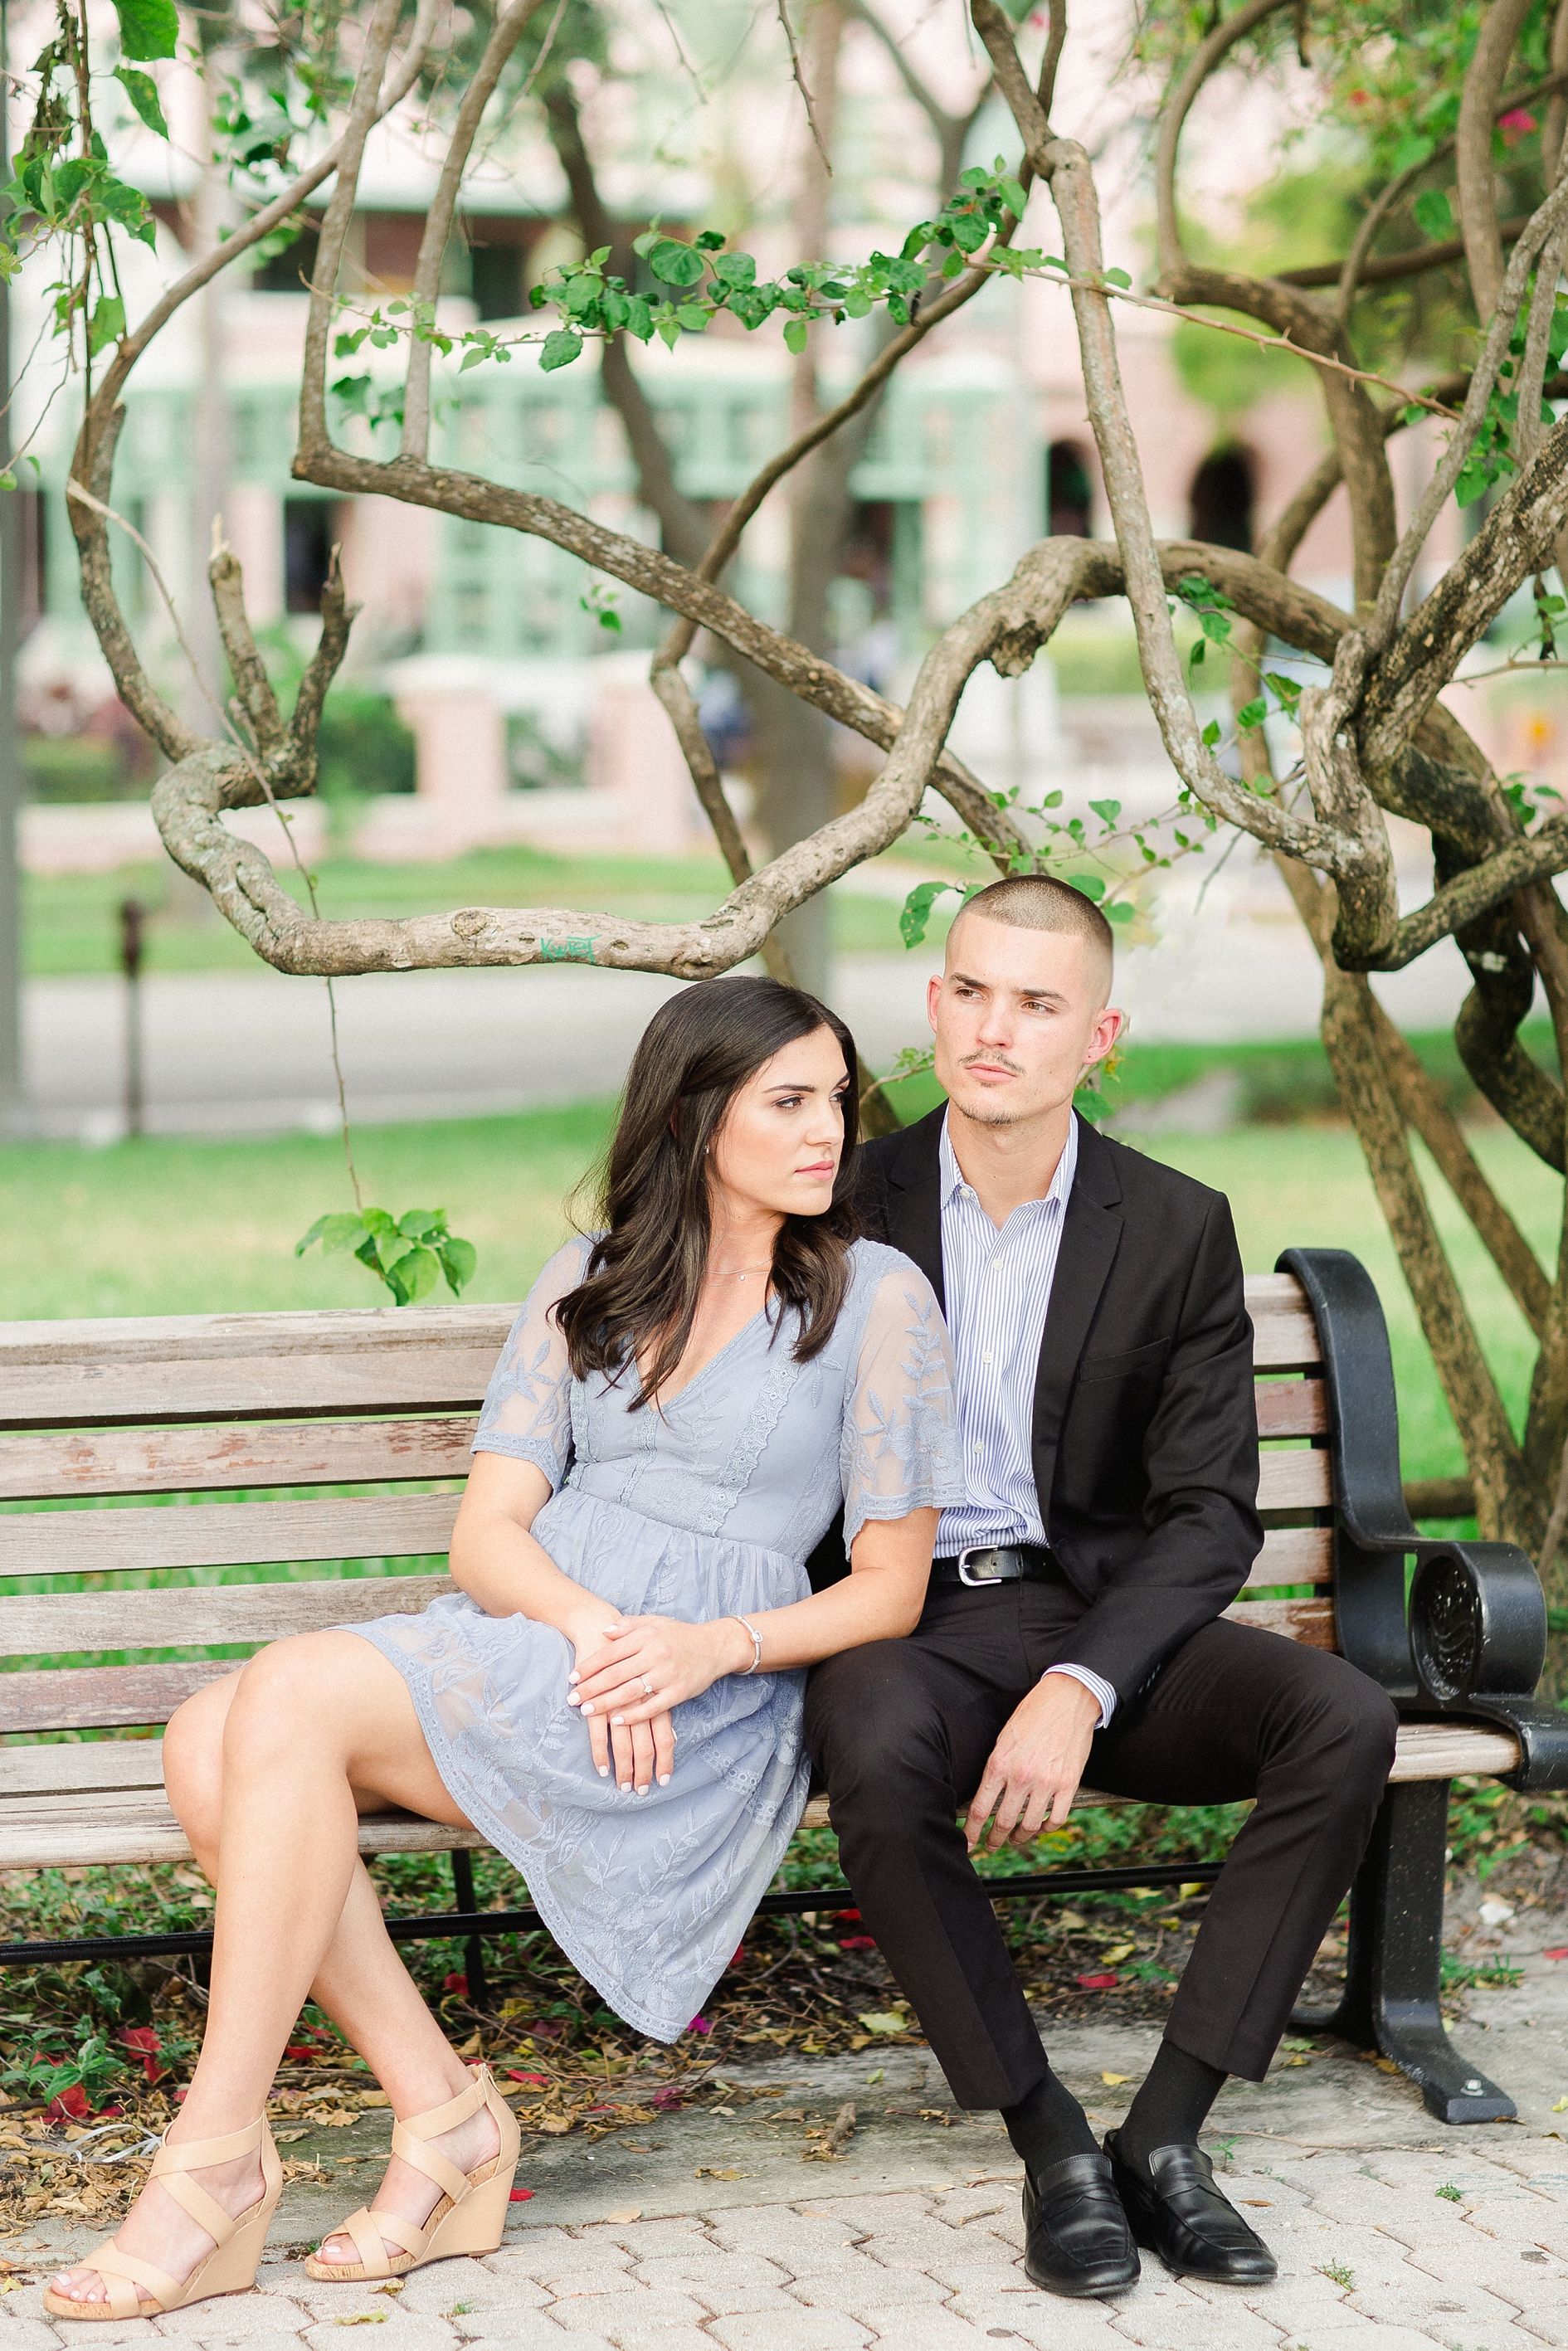 Downtown St. Pete Engagement | Jordan and Cody | © Ailyn La Torre Photography 2017